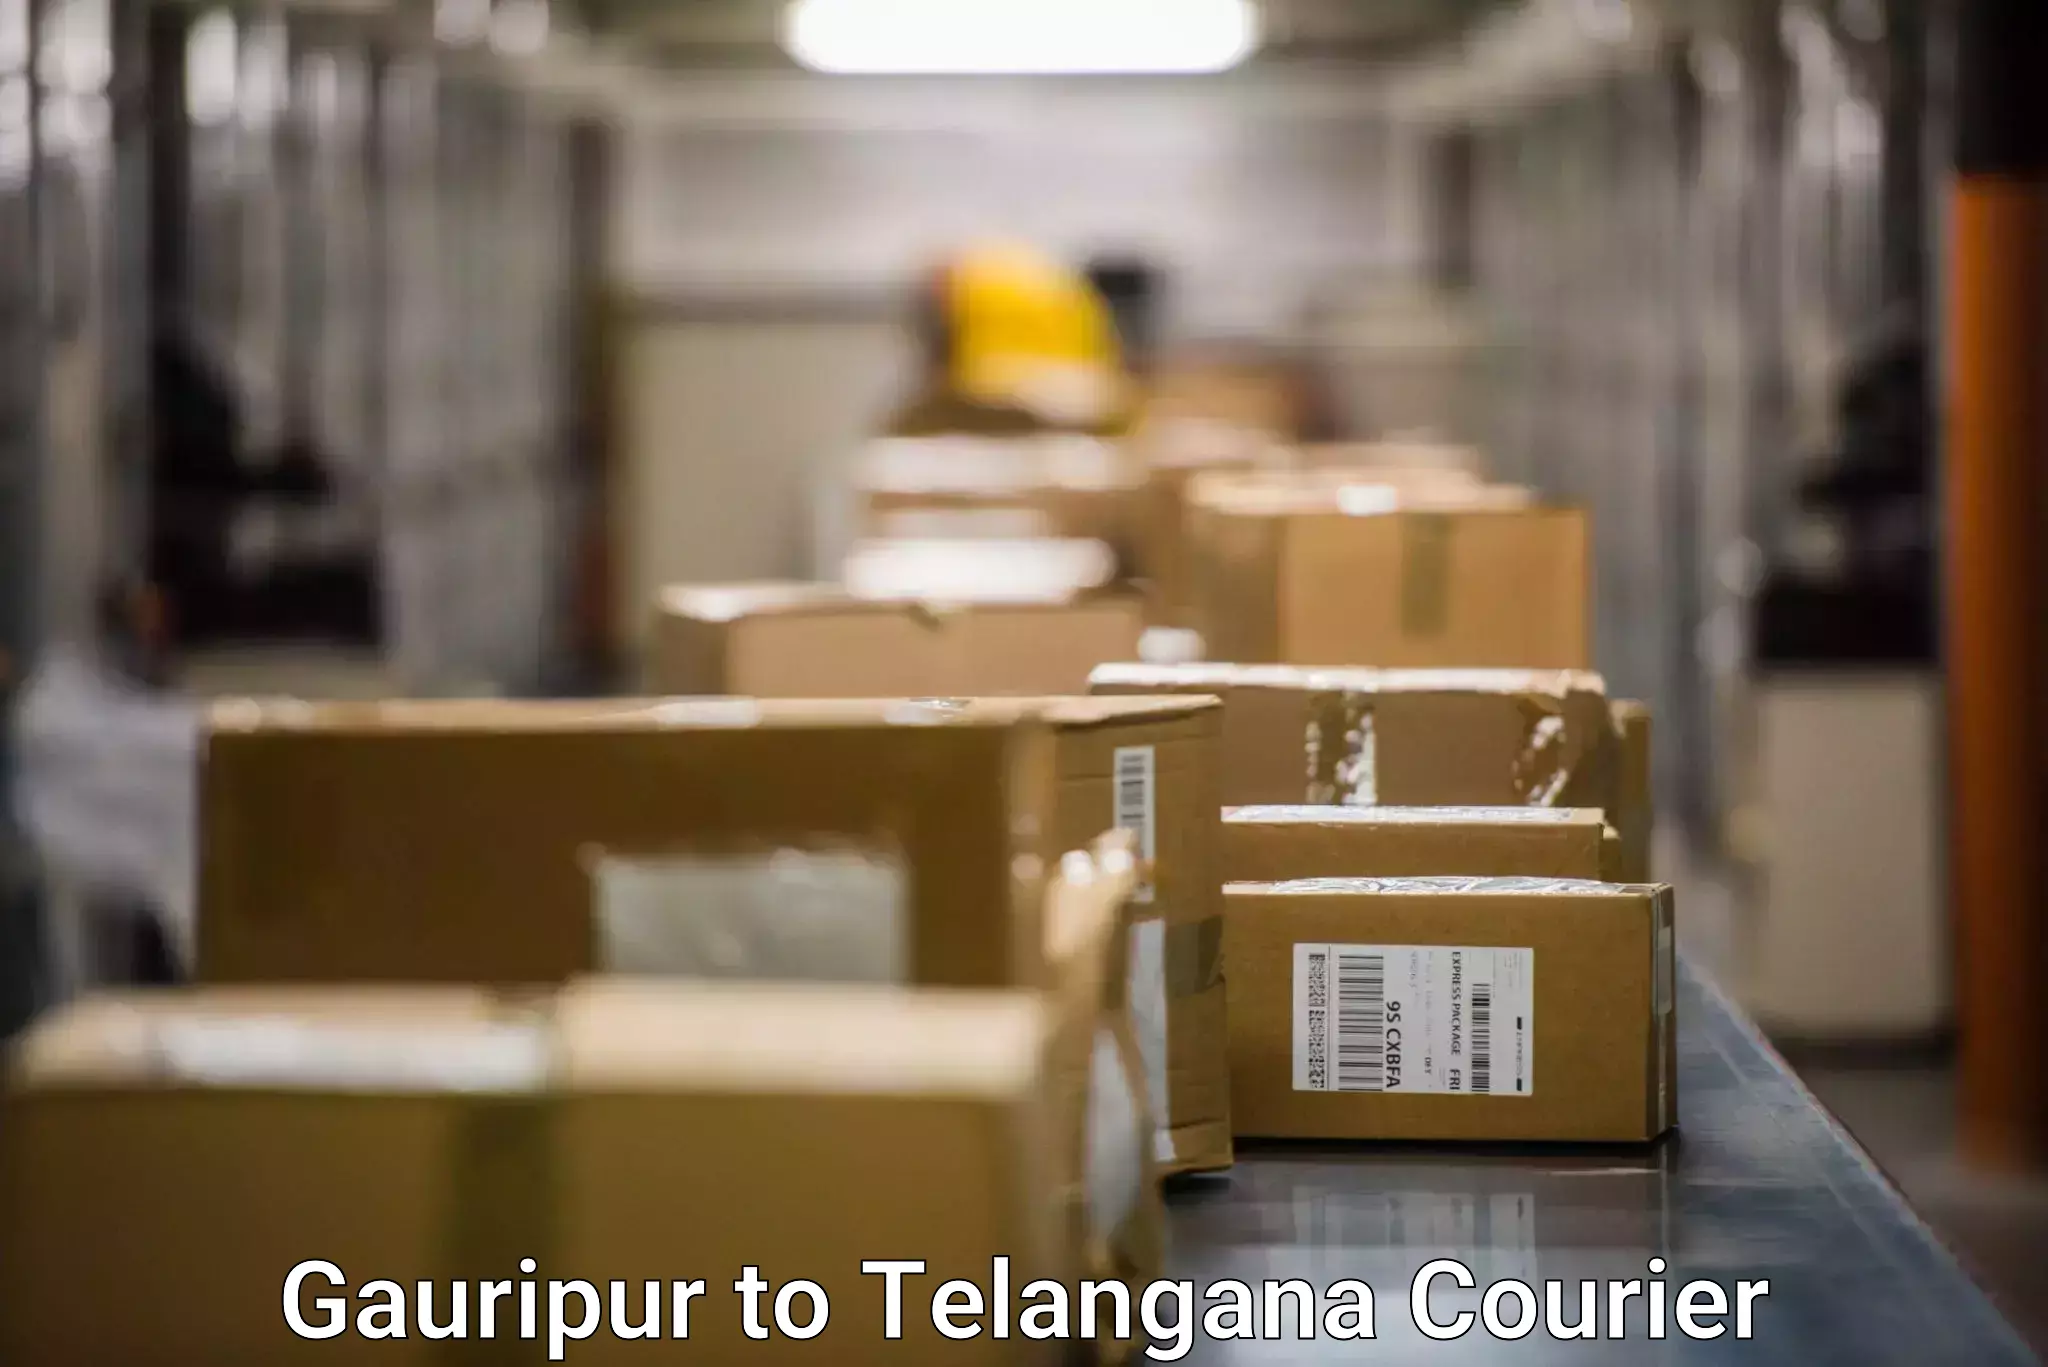 Bulk courier orders Gauripur to Sultanabad